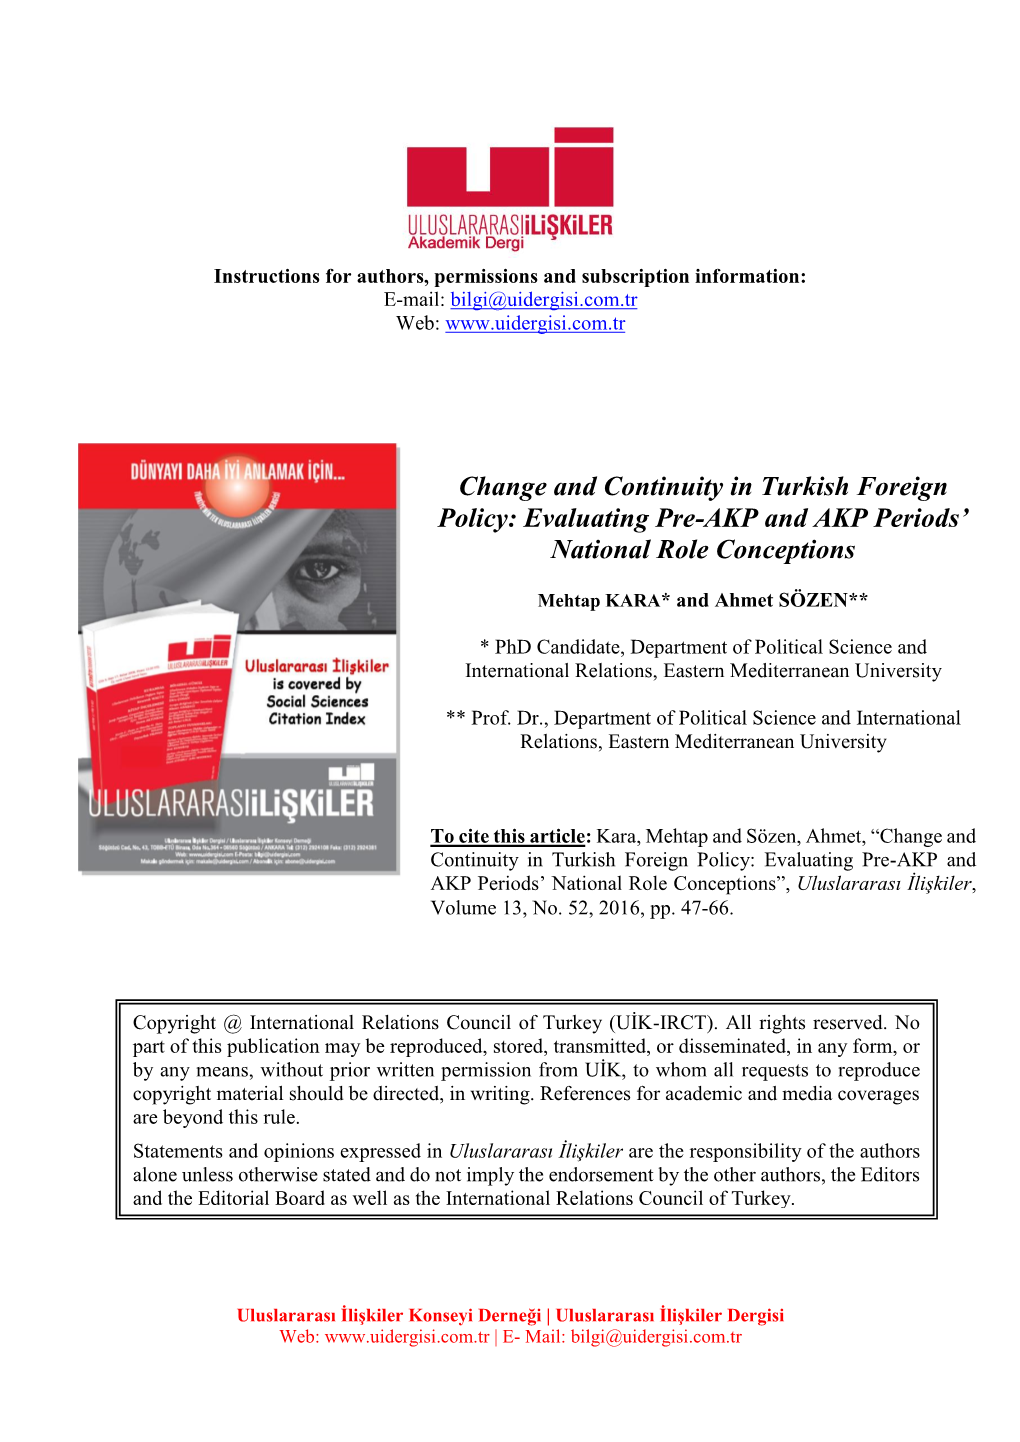 Change and Continuity in Turkish Foreign Policy: Evaluating Pre-AKP and AKP Periods’ National Role Conceptions”, Uluslararası İlişkiler, Volume 1 3, No